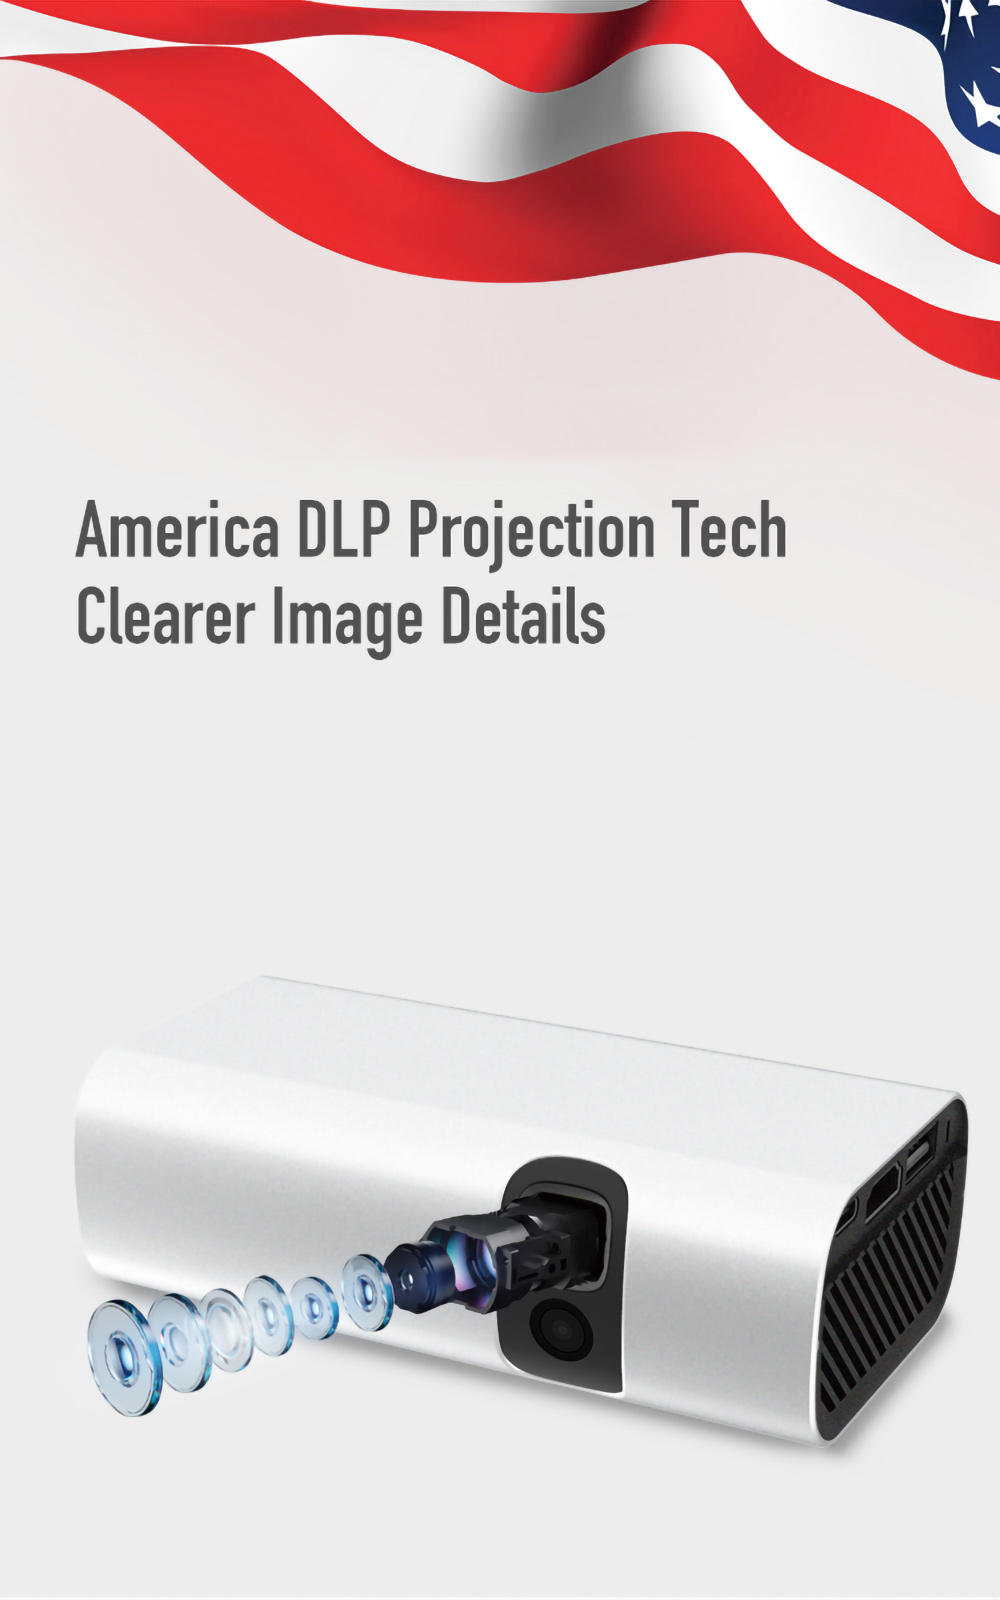 Lenovo LXP200 Portable Smart Projector Home Office Projector Support 1080P Resolution 200ANSI Lumens Keystone Correction